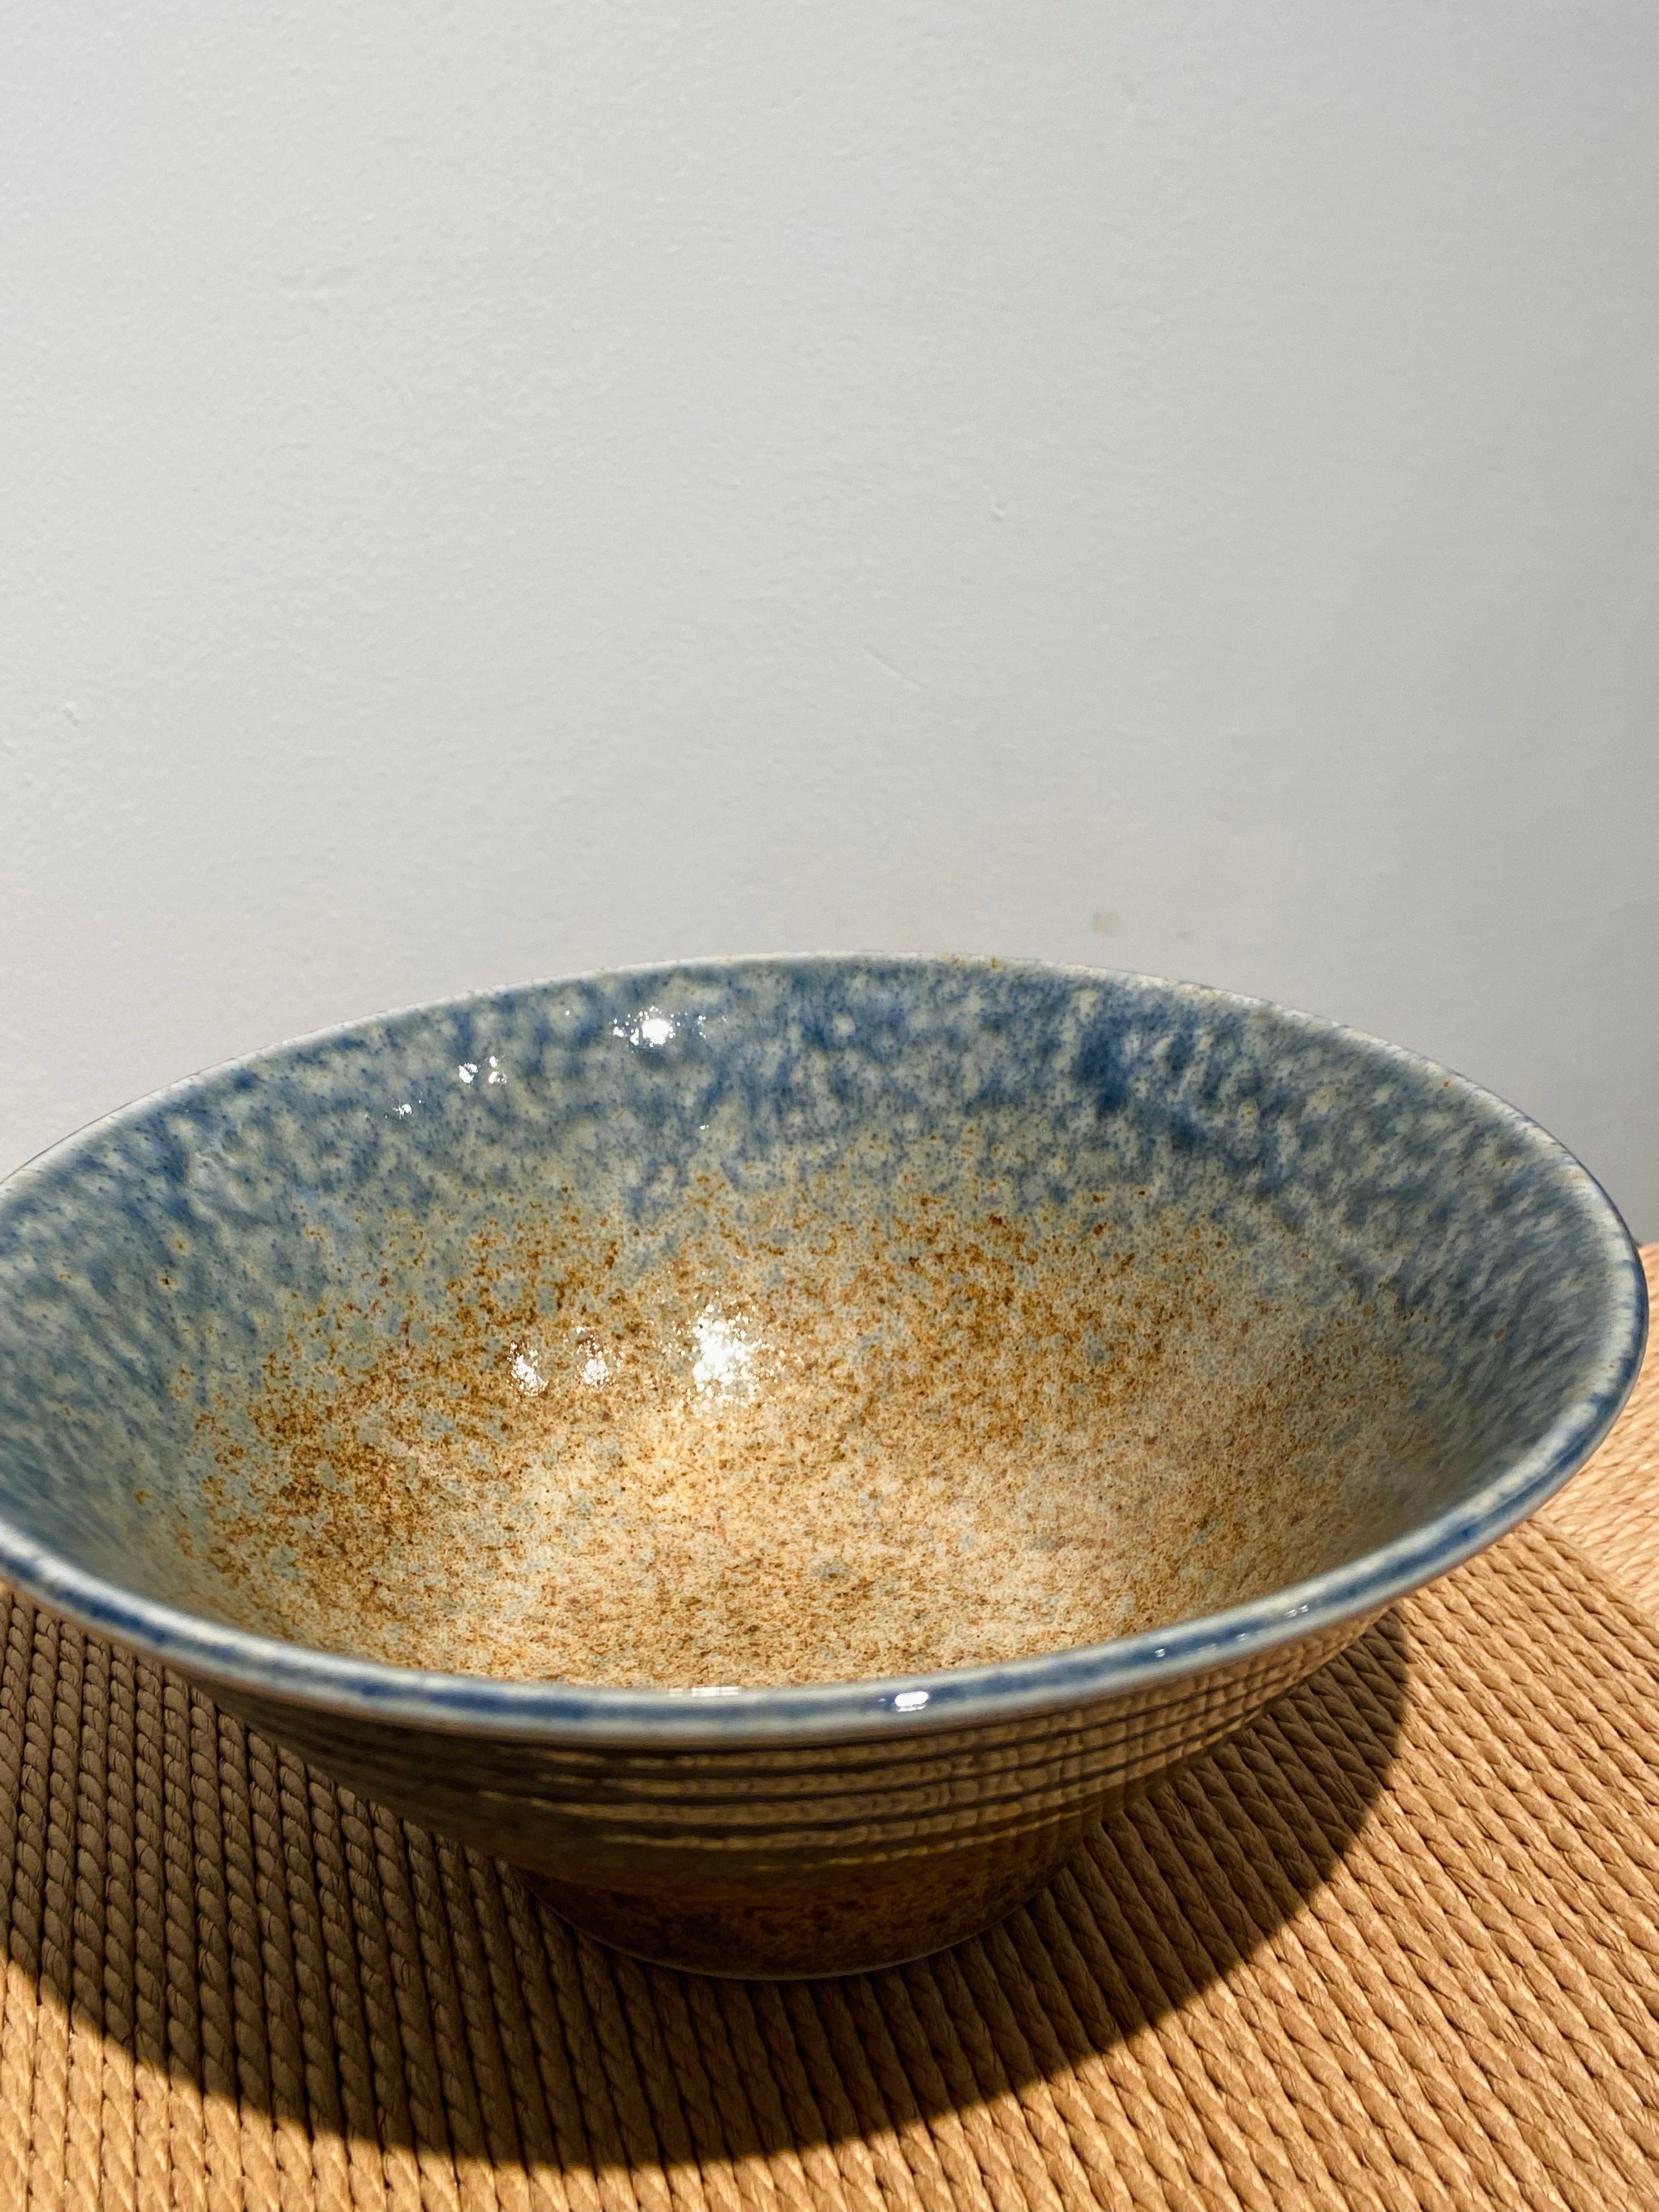 Noodle bowl with blue and brown glaze